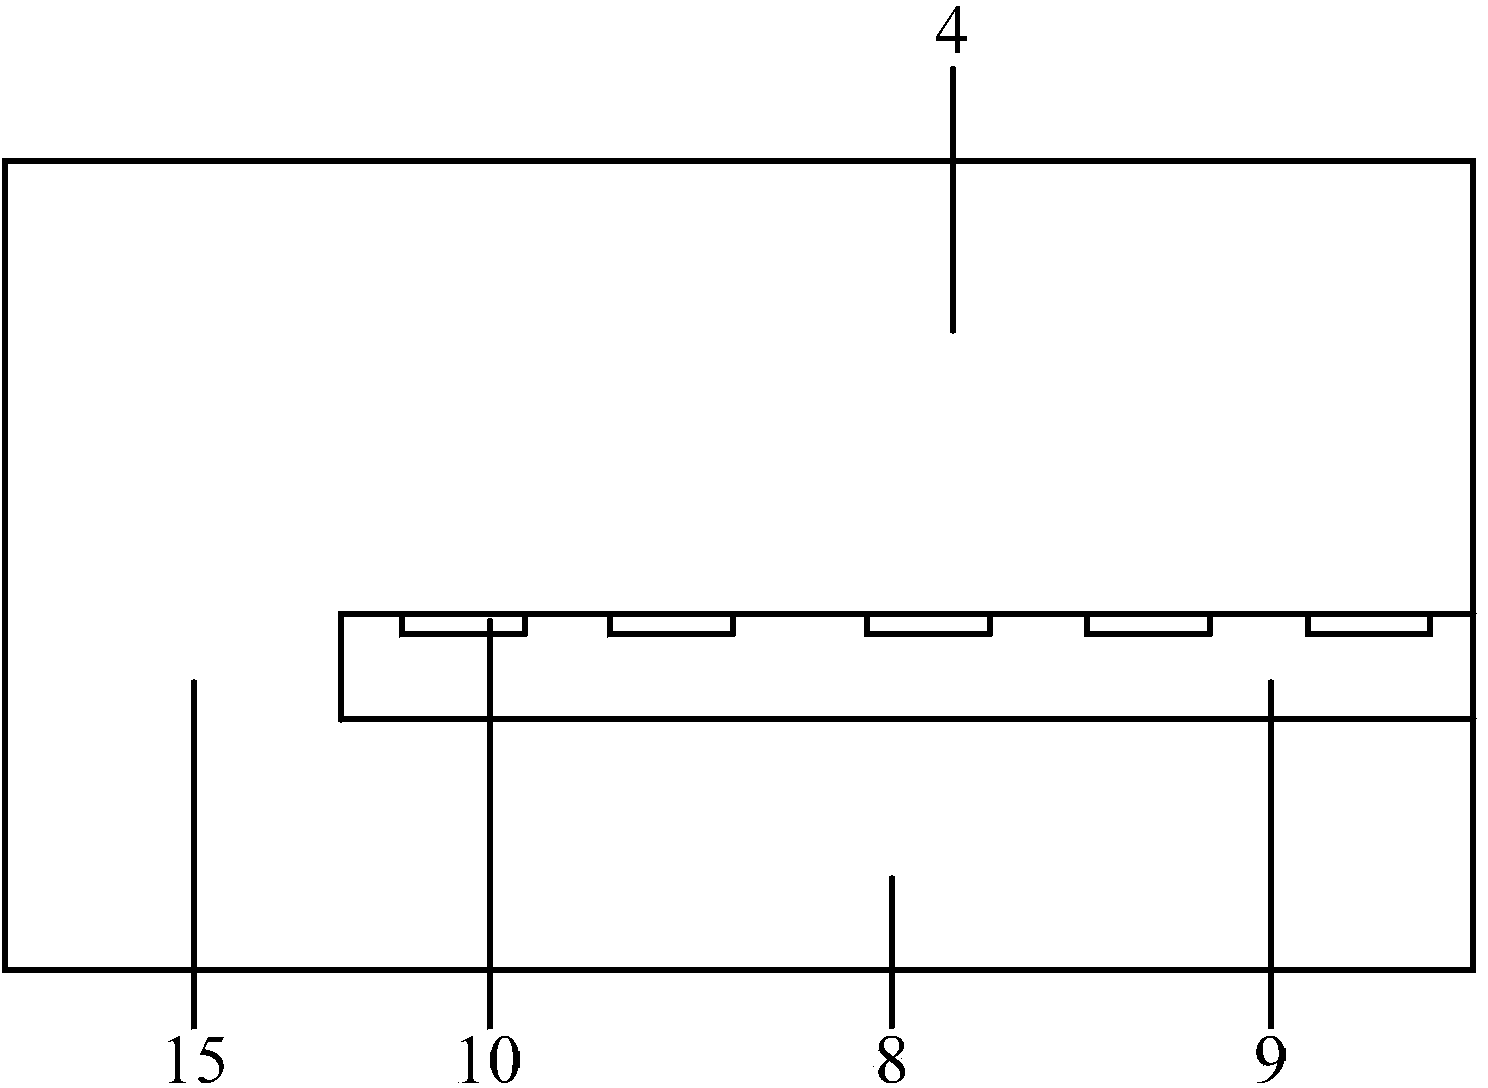 SOI voltage resistance structure with charge regions fixed at equal intervals and SOI power device